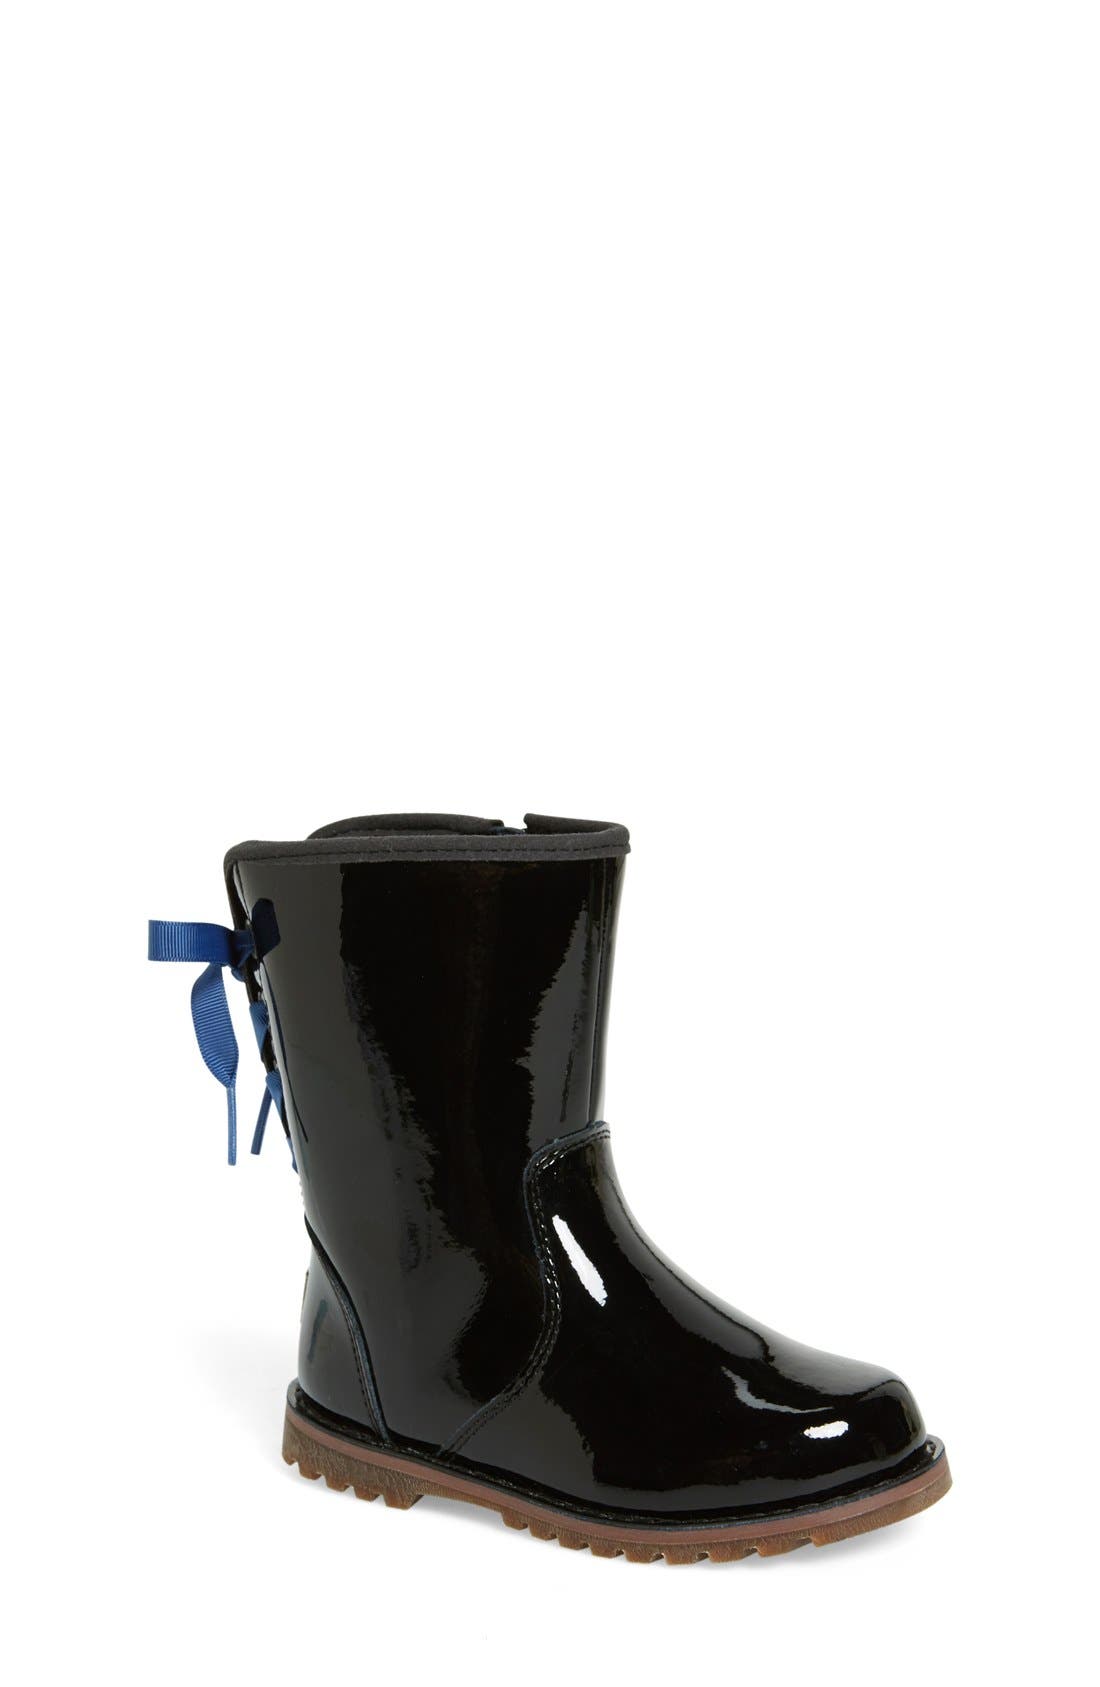 ugg patent leather boots